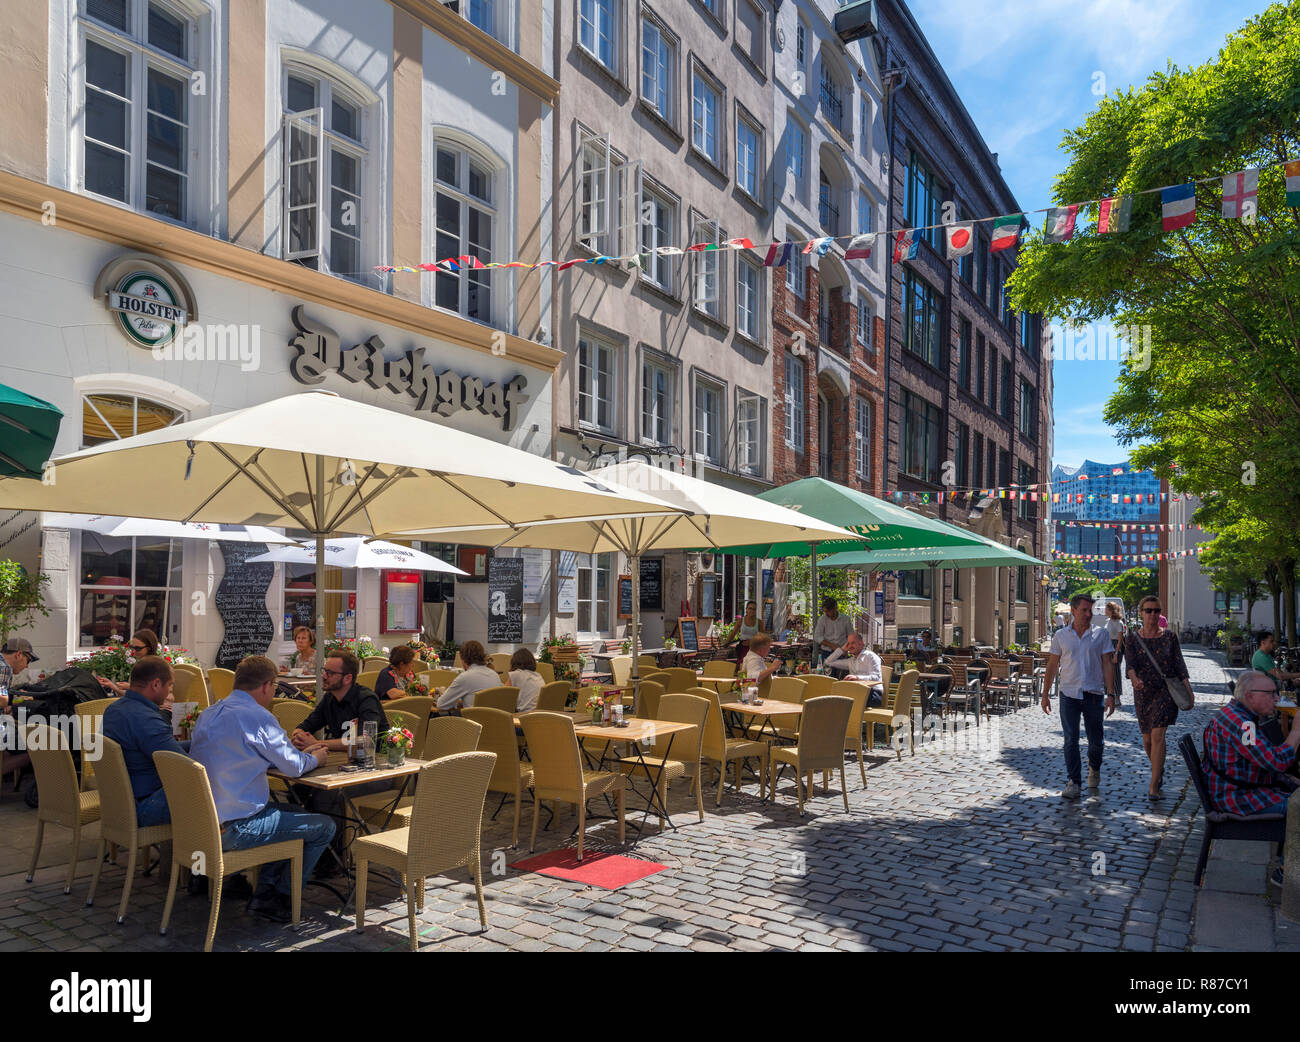 Cafes and bars on historic Deichstrasse (Deichstraße) in the Altstadt (Old Town), Hamburg, Germany Stock Photo